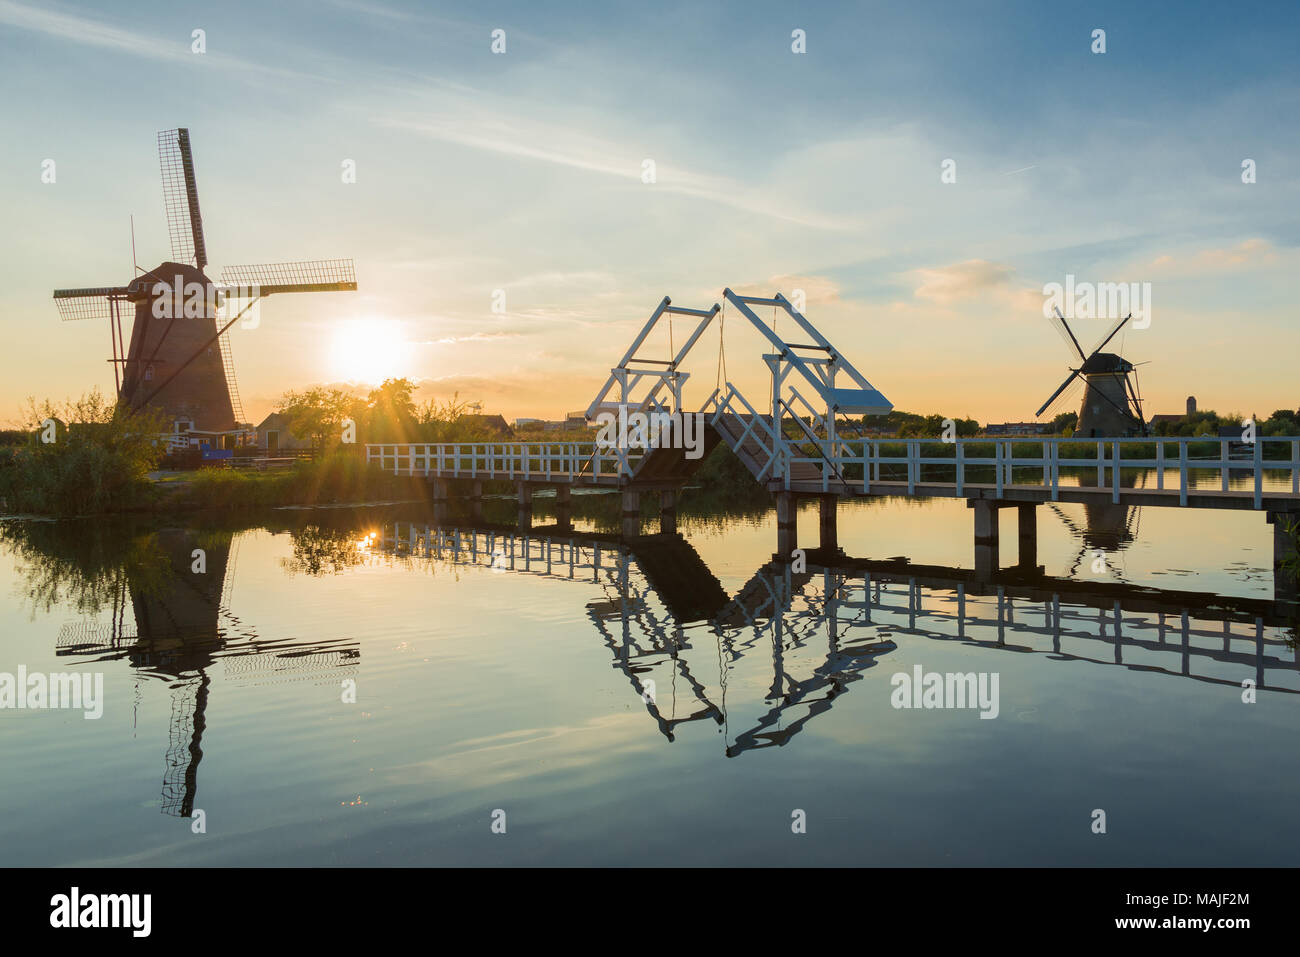 A landscape in the Netherlands with two windmills and a drawbridge in the low sun at sunset with reflection in the water in Kinderdijk, Netherlands. Stock Photo